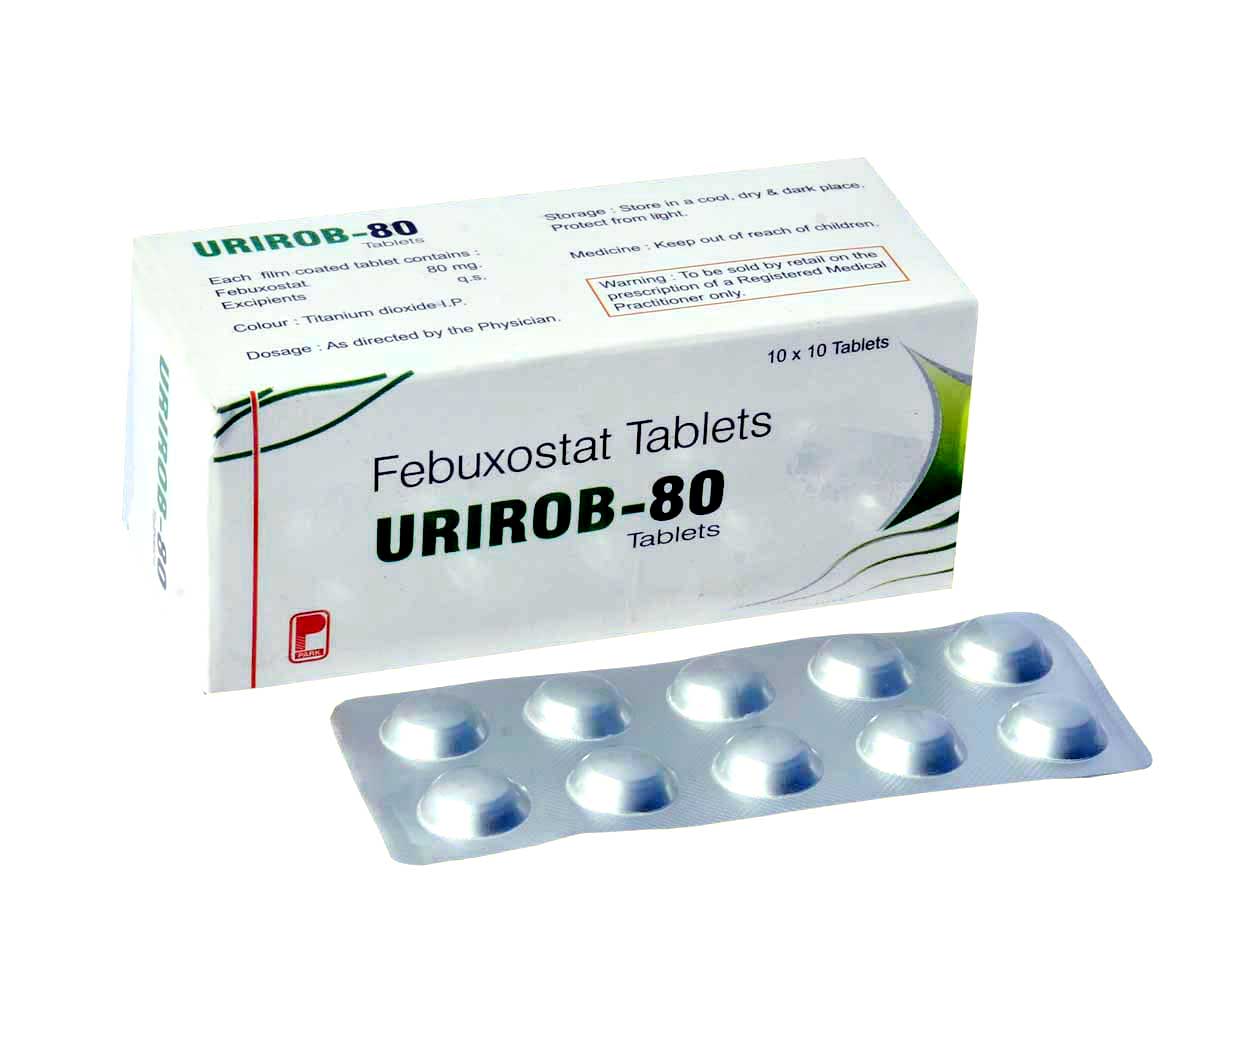 Product Name: URIROB 80, Compositions of URIROB 80 are Febuxostat Tablets - Park Pharmaceuticals